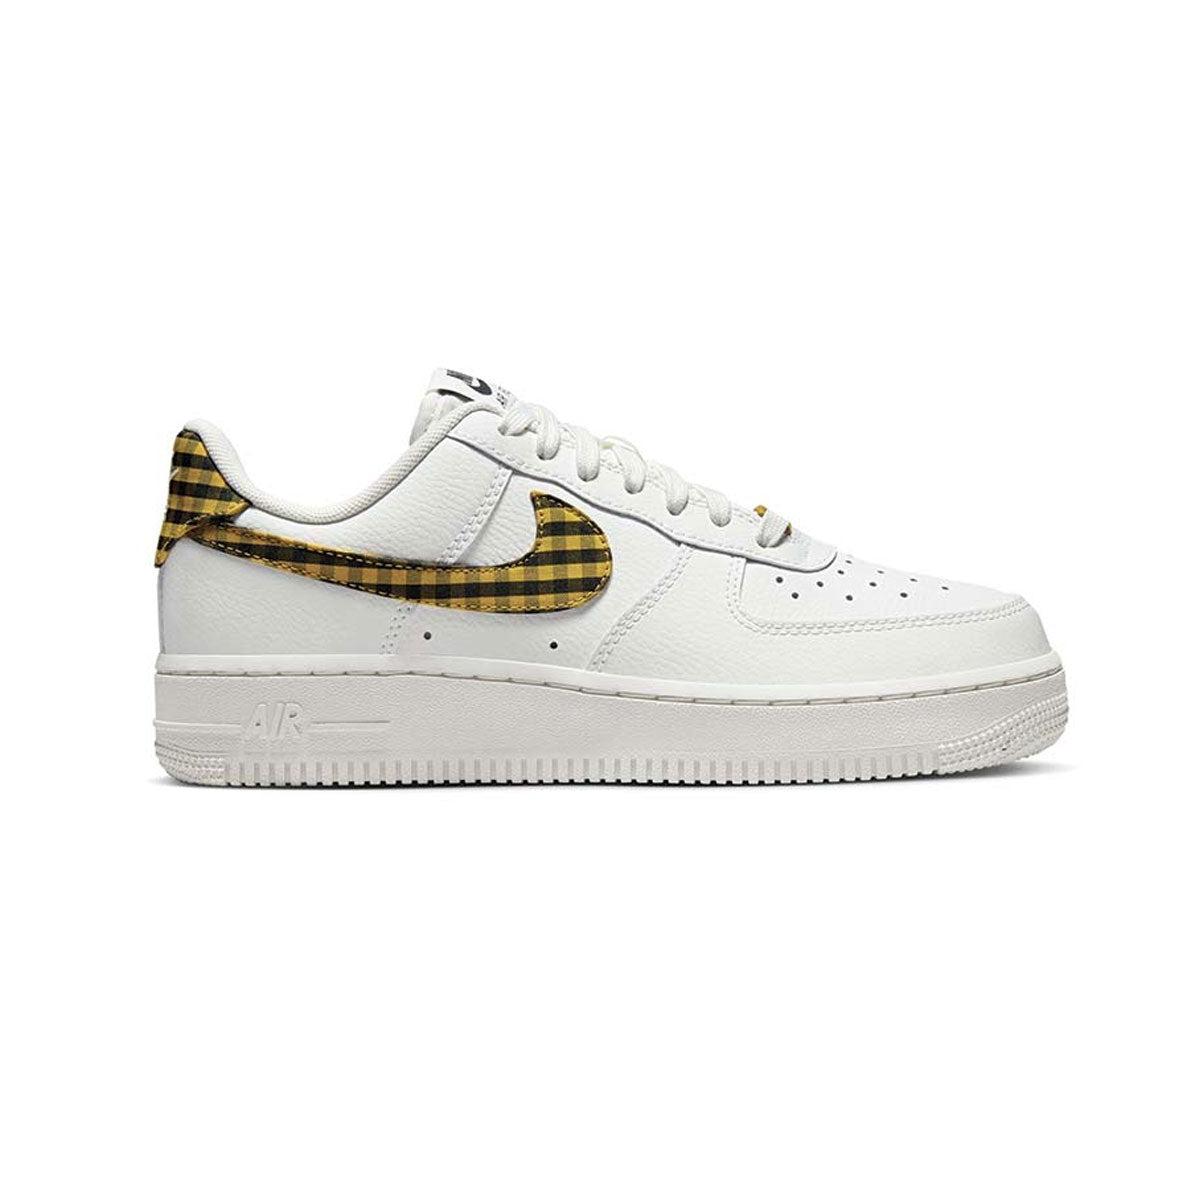 Nike Women's Air Force 1 '07 ESS Trend